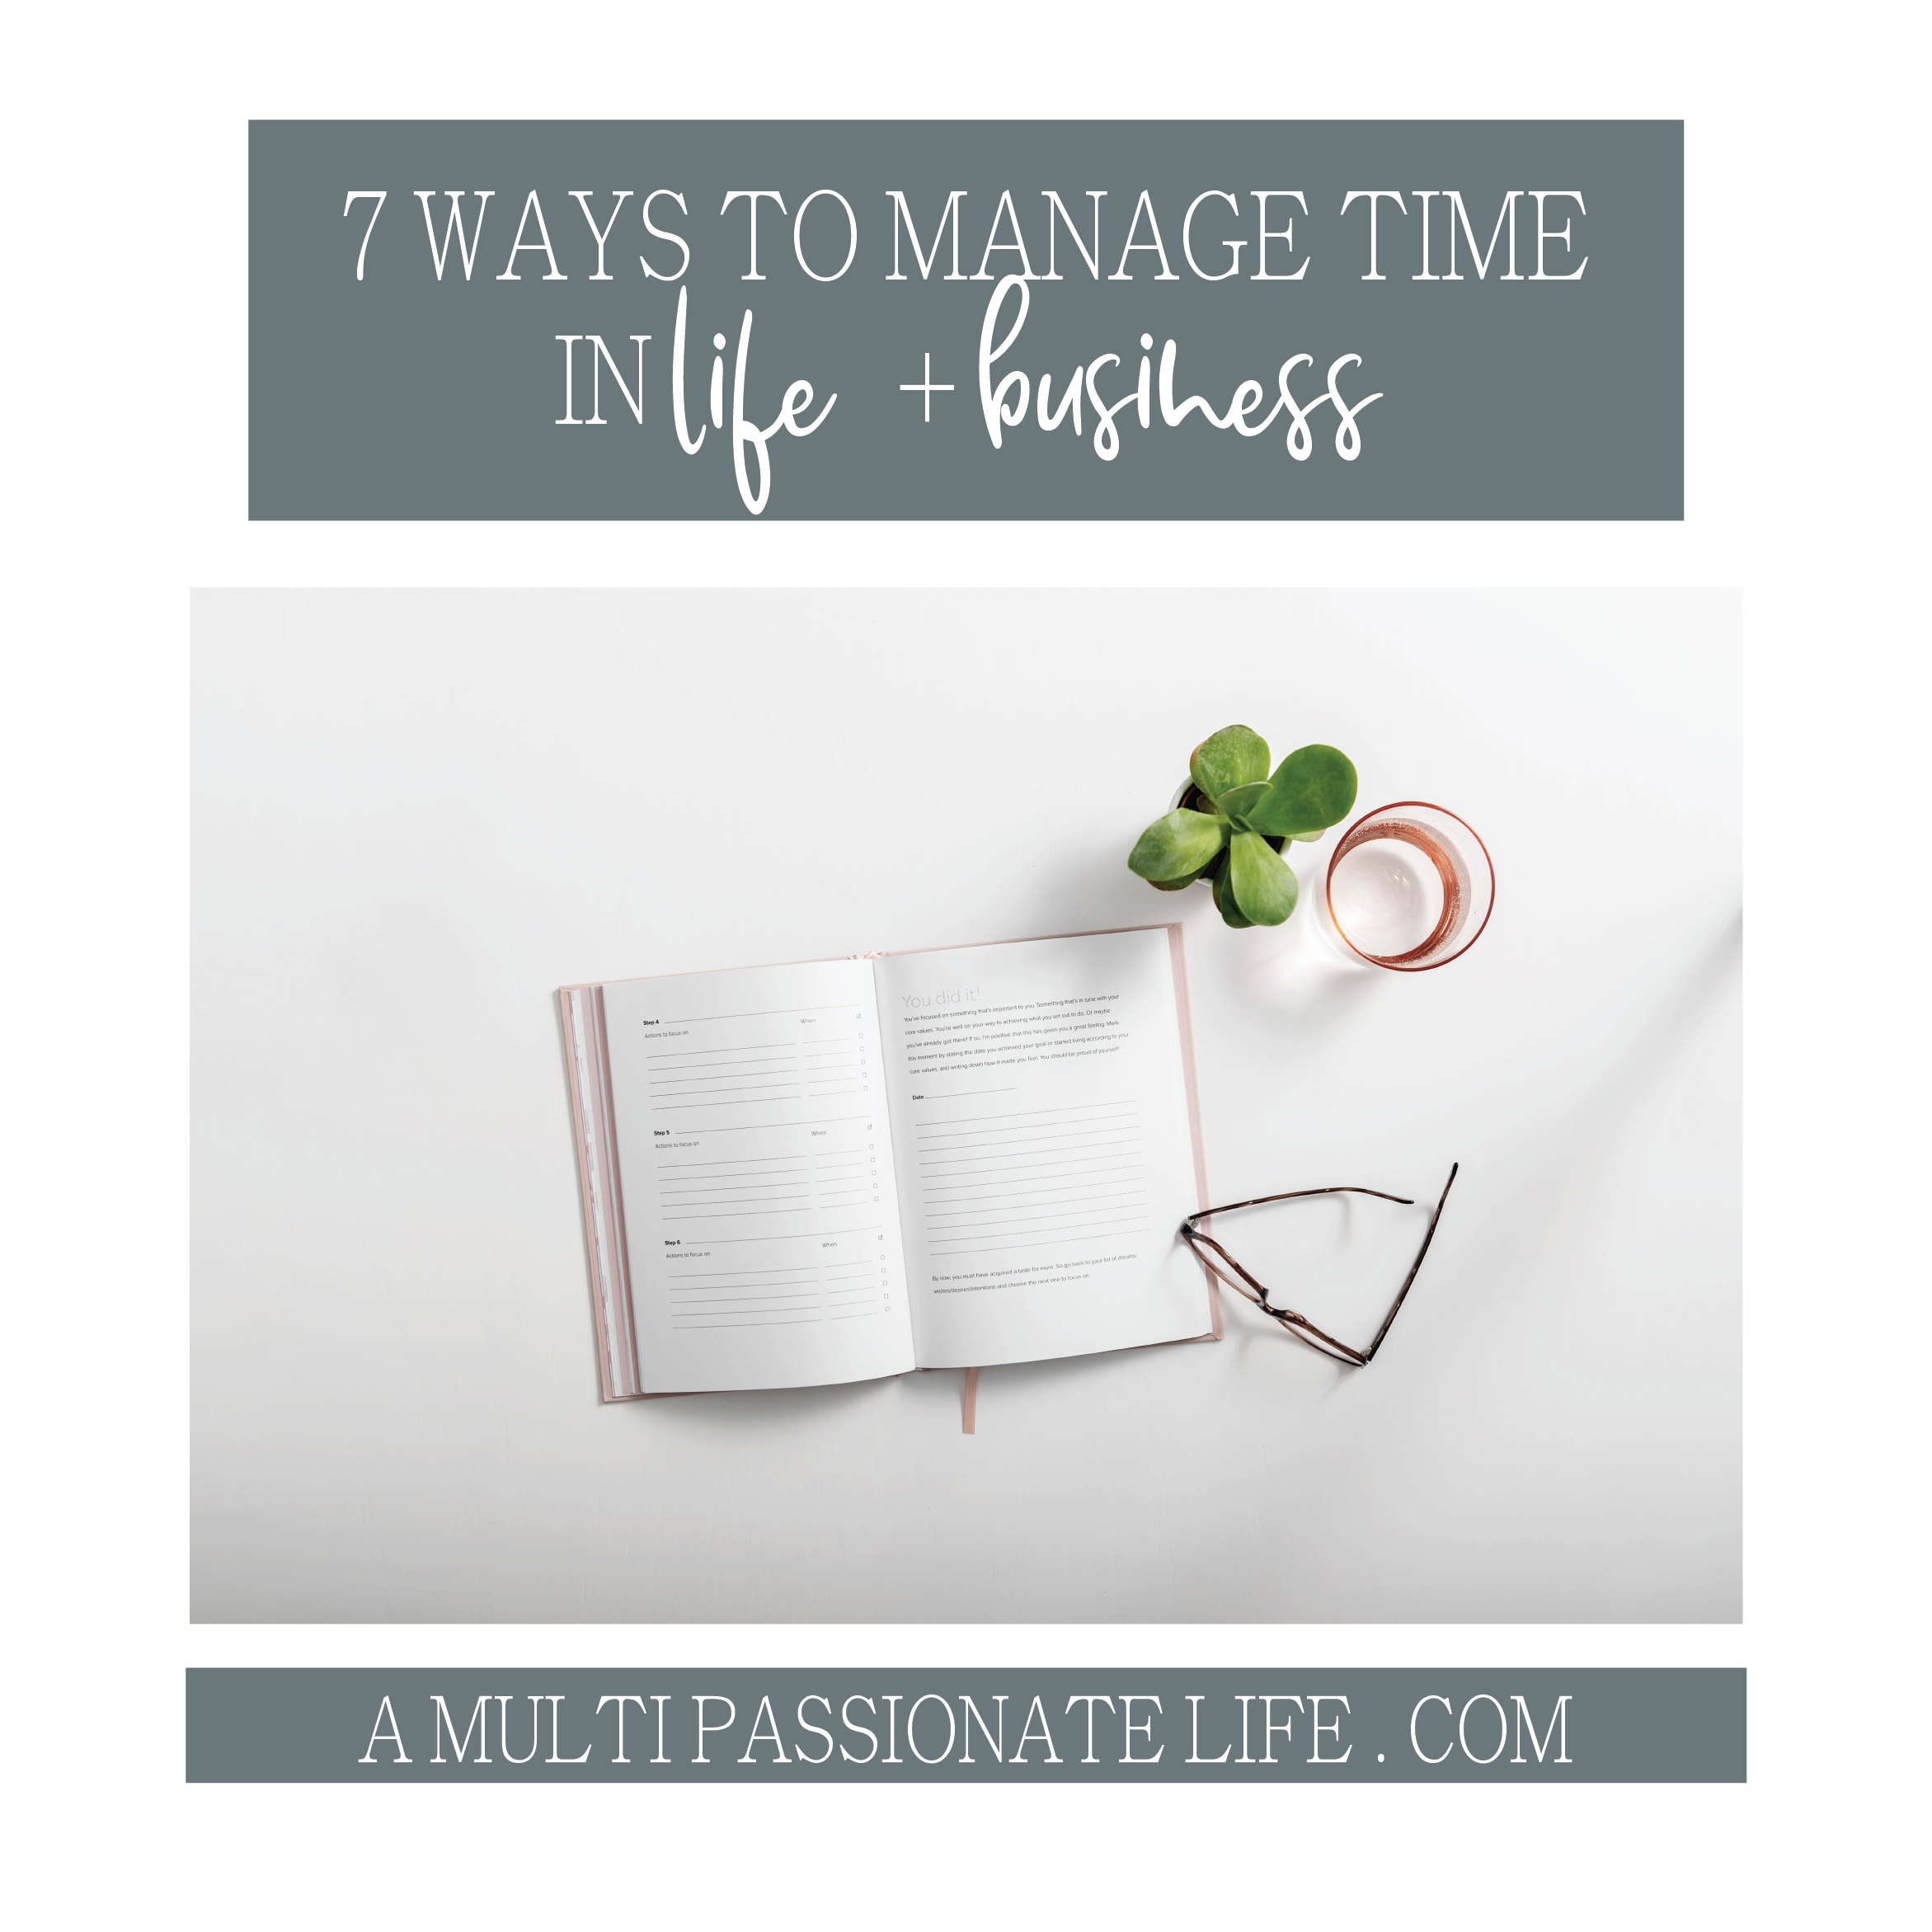 7 WAYS TO MANAGE TIME LIFE BUSINESS